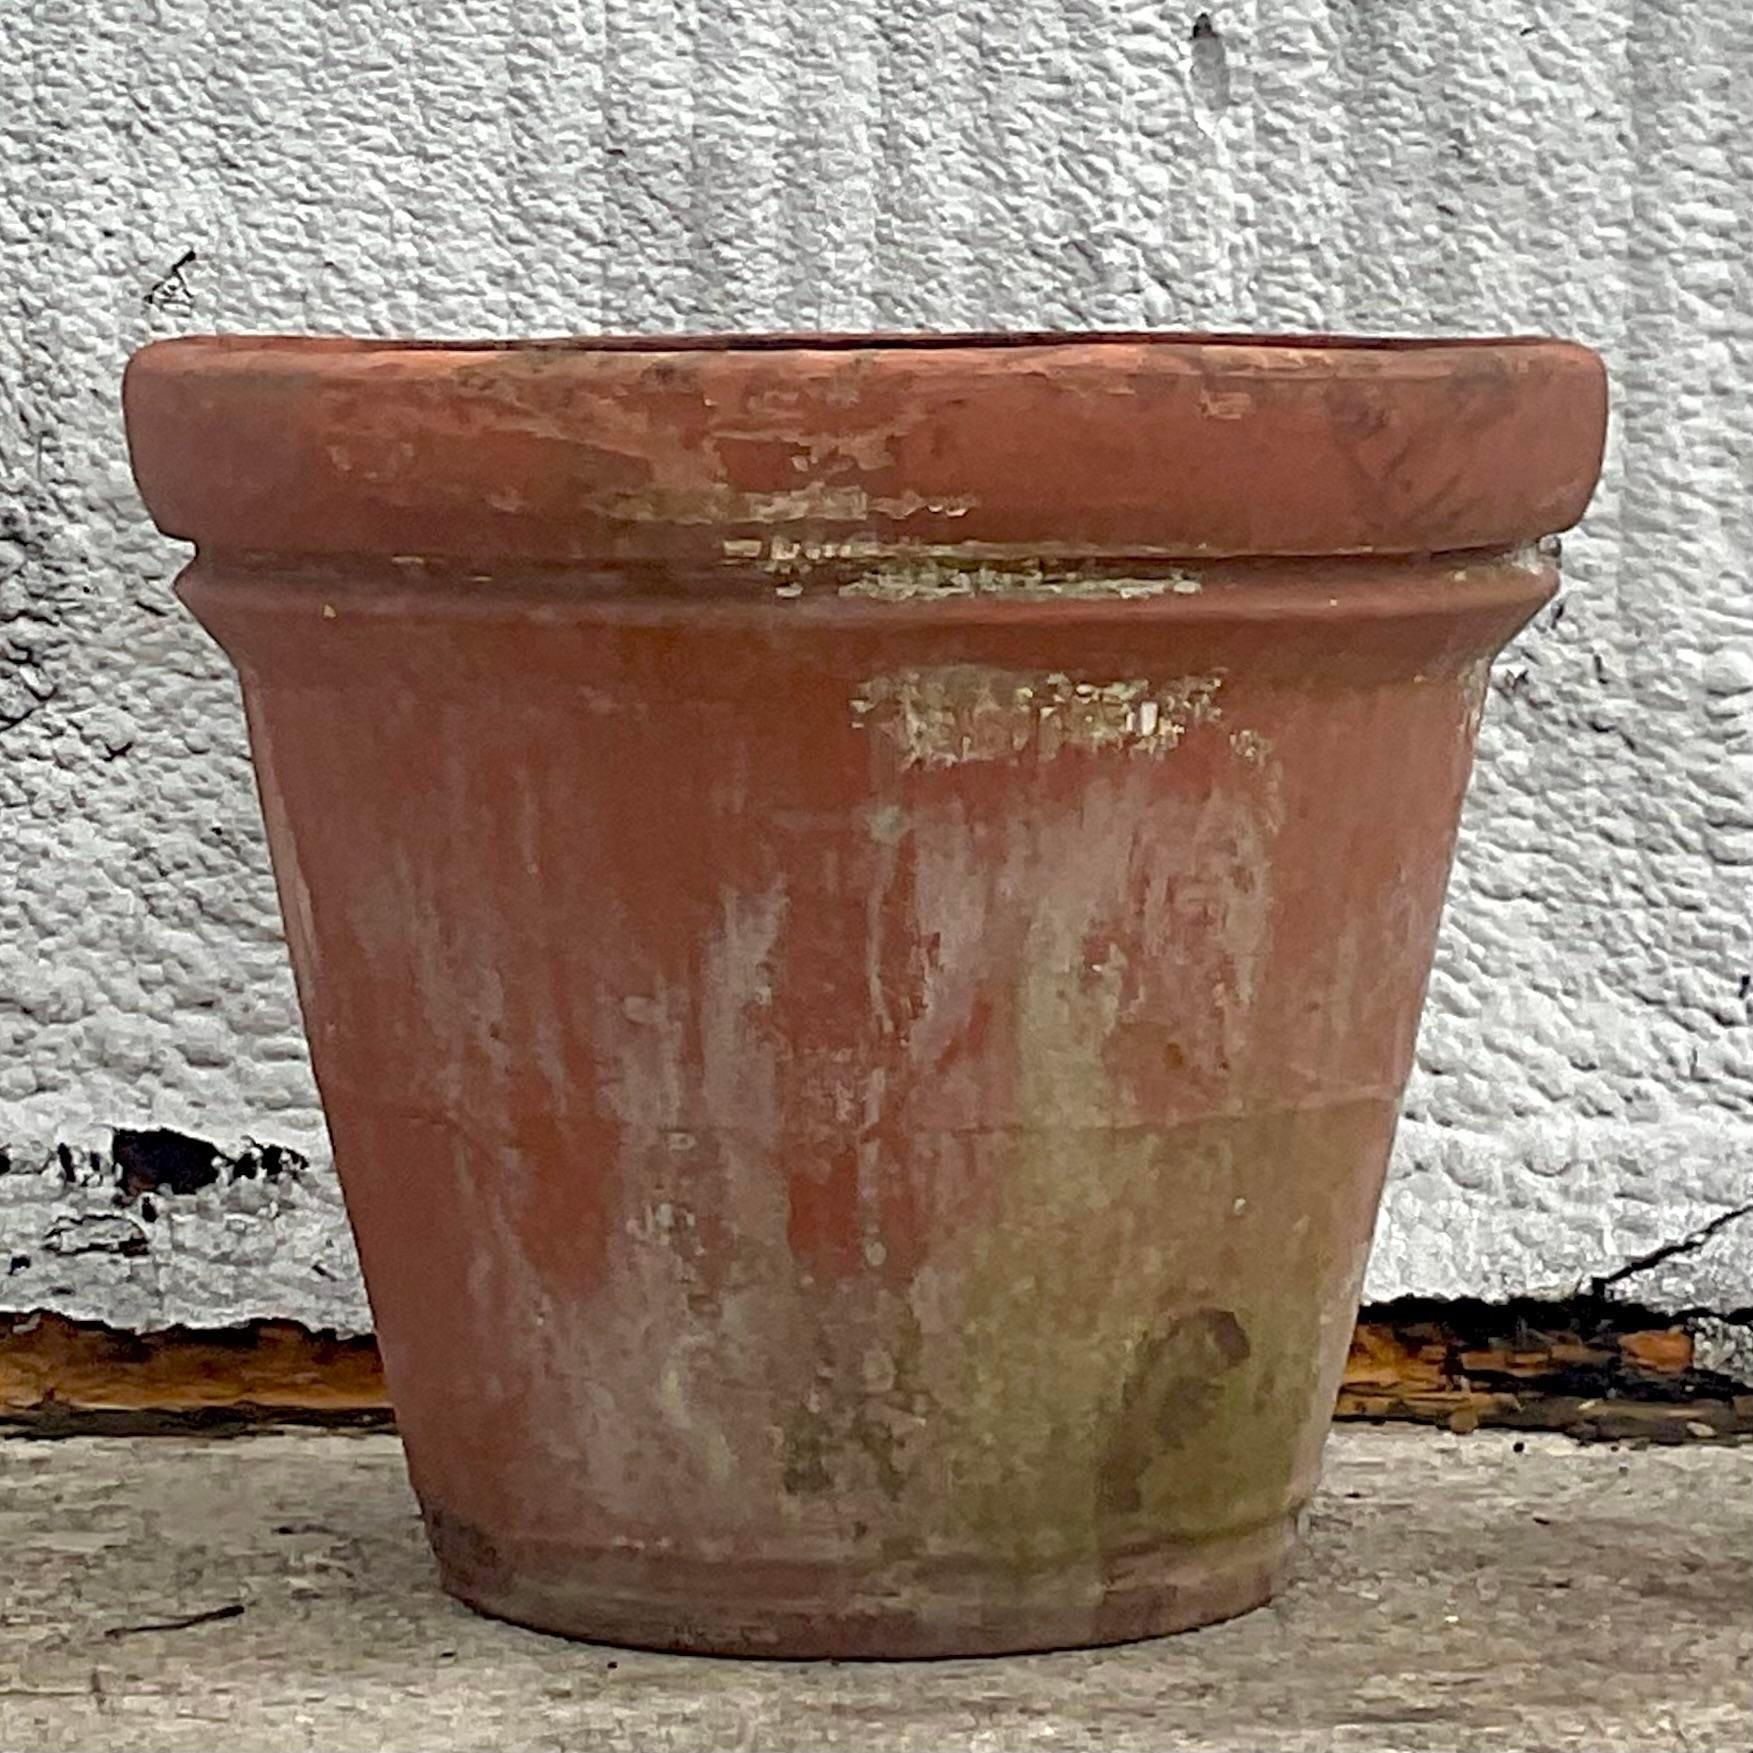 A fantastic vintage Boho planter. A chic Italian terra cotta with a beautiful patina from time. Drilled for drainage. From a fabulous Victoria Park estate. 